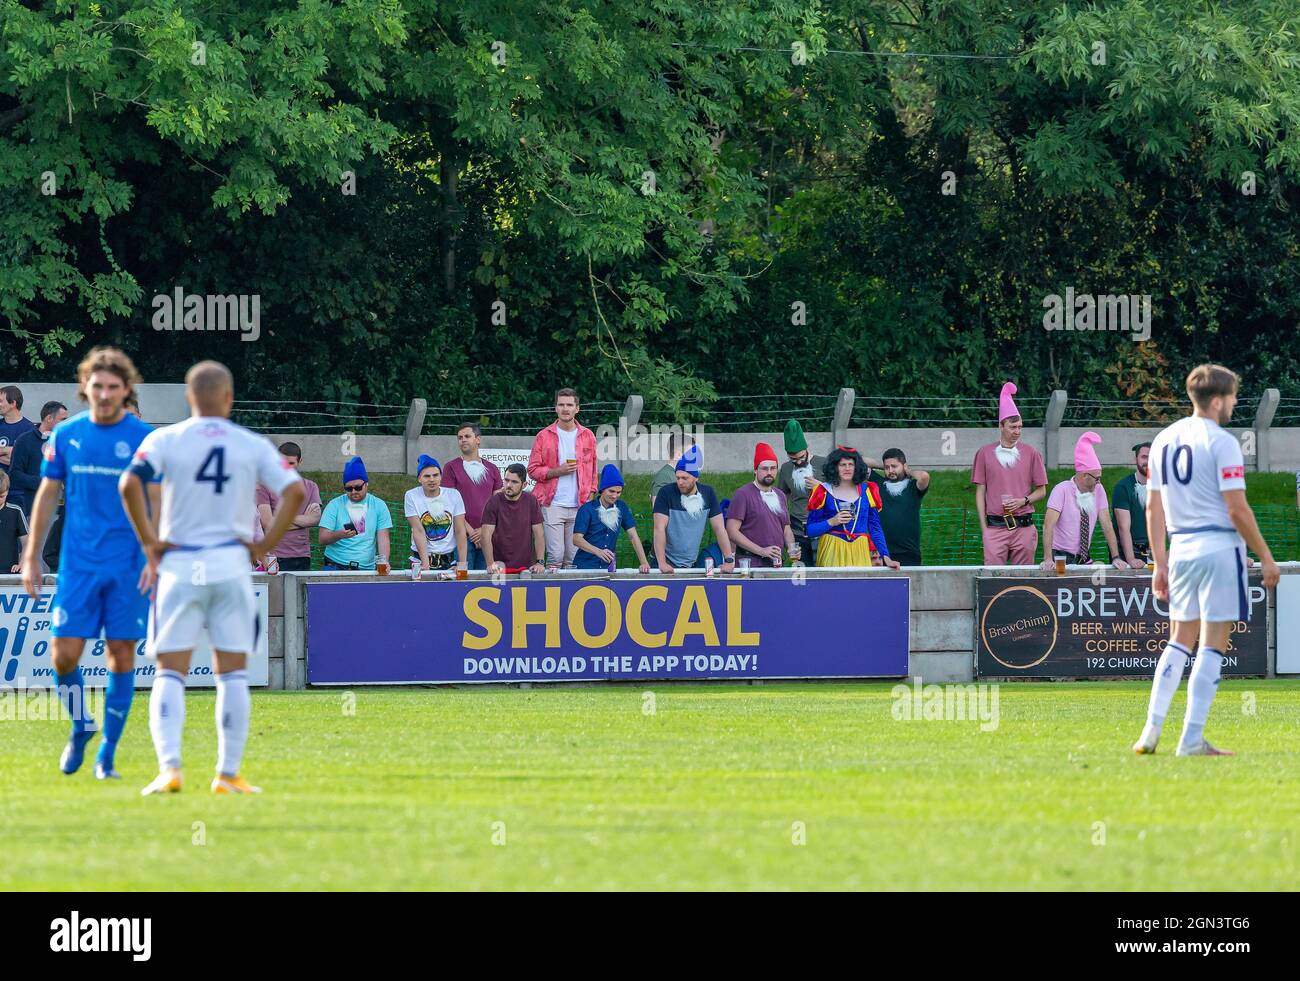 A group of male friends dressed as Snow White and the Seven Dwarfs have their Stag Party watching Trafford FC Stock Photo